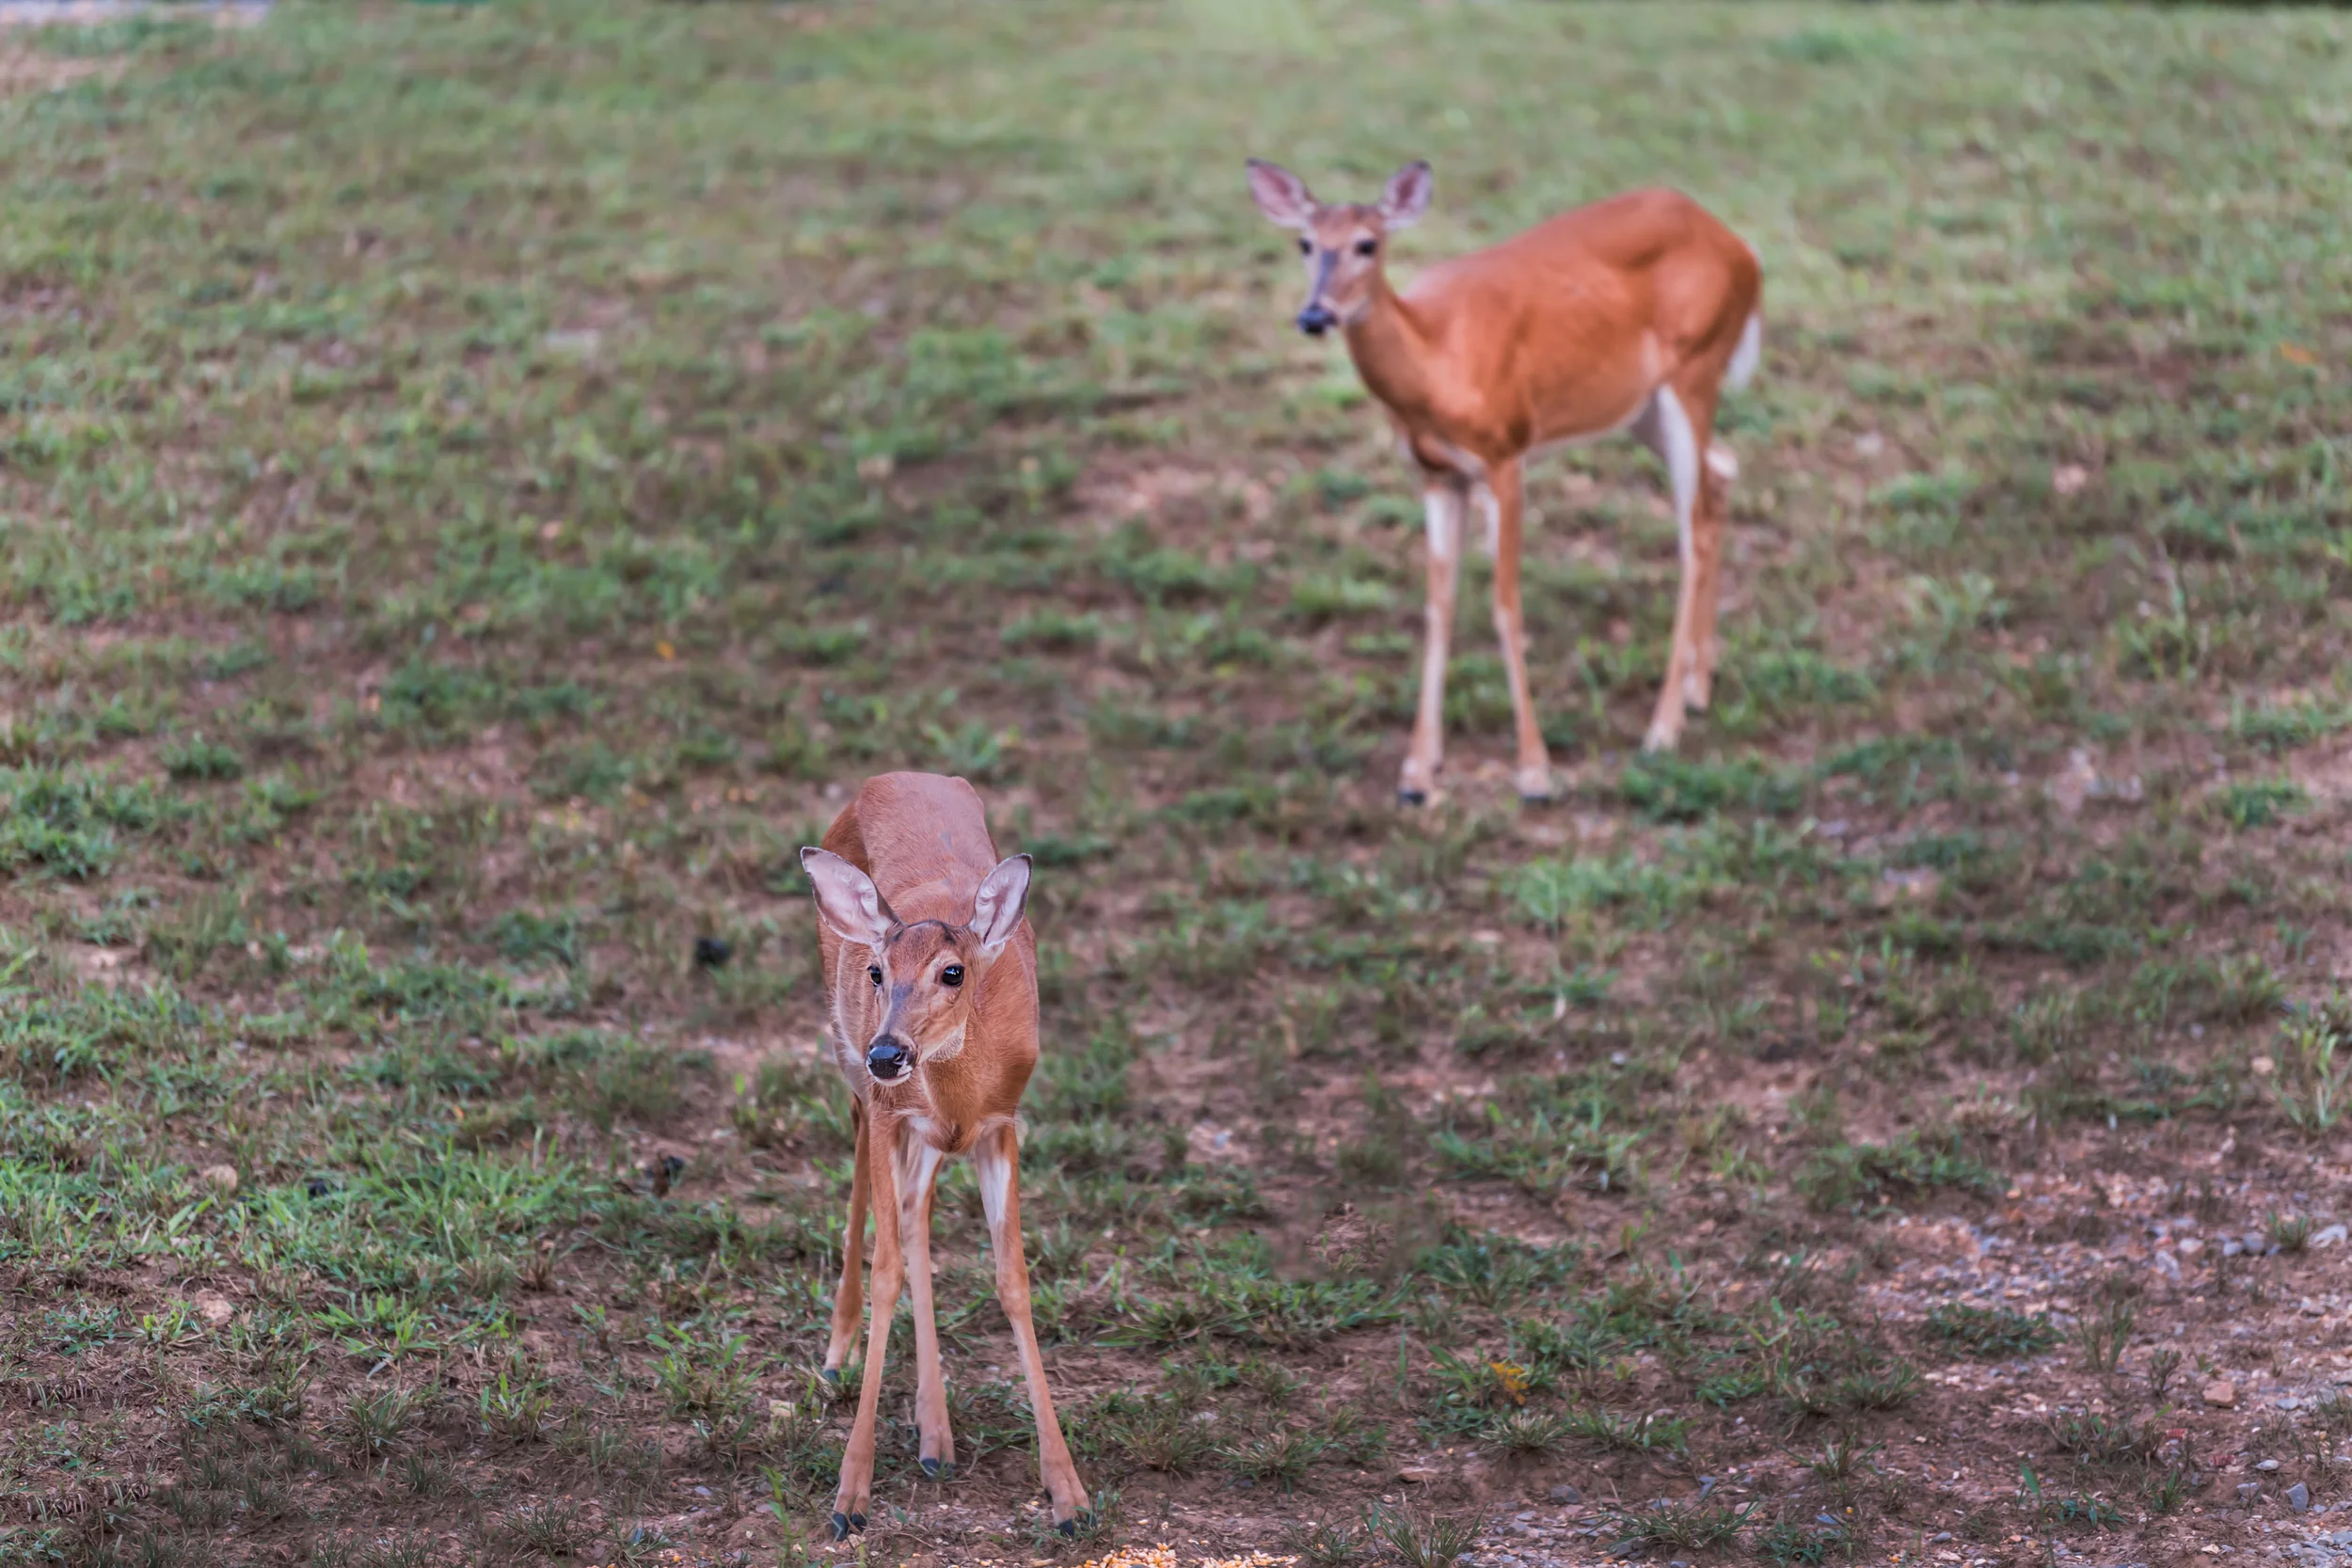 Deer on grass in Soddy Daisy Tennessee